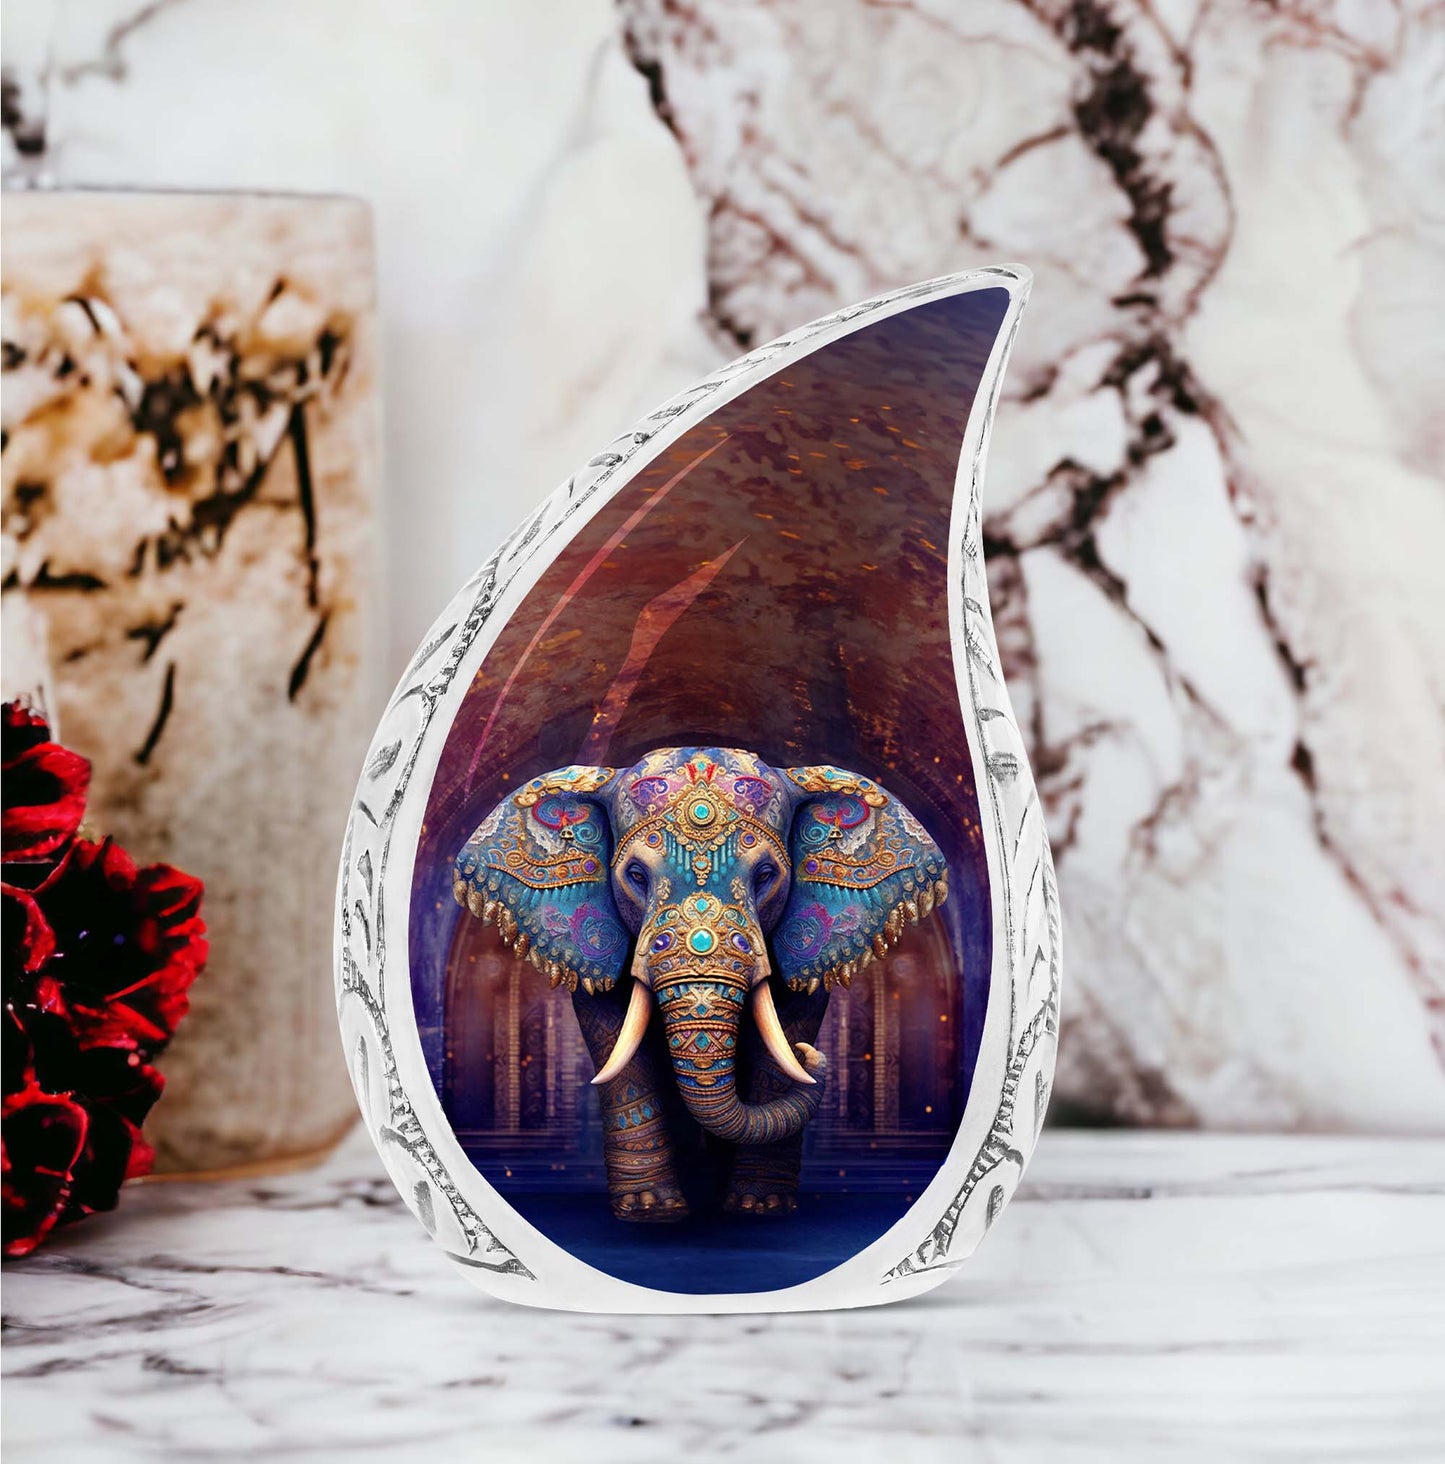 Large Elephant-themed urn, intricately patterned, for adult human ashes, ideal for burial